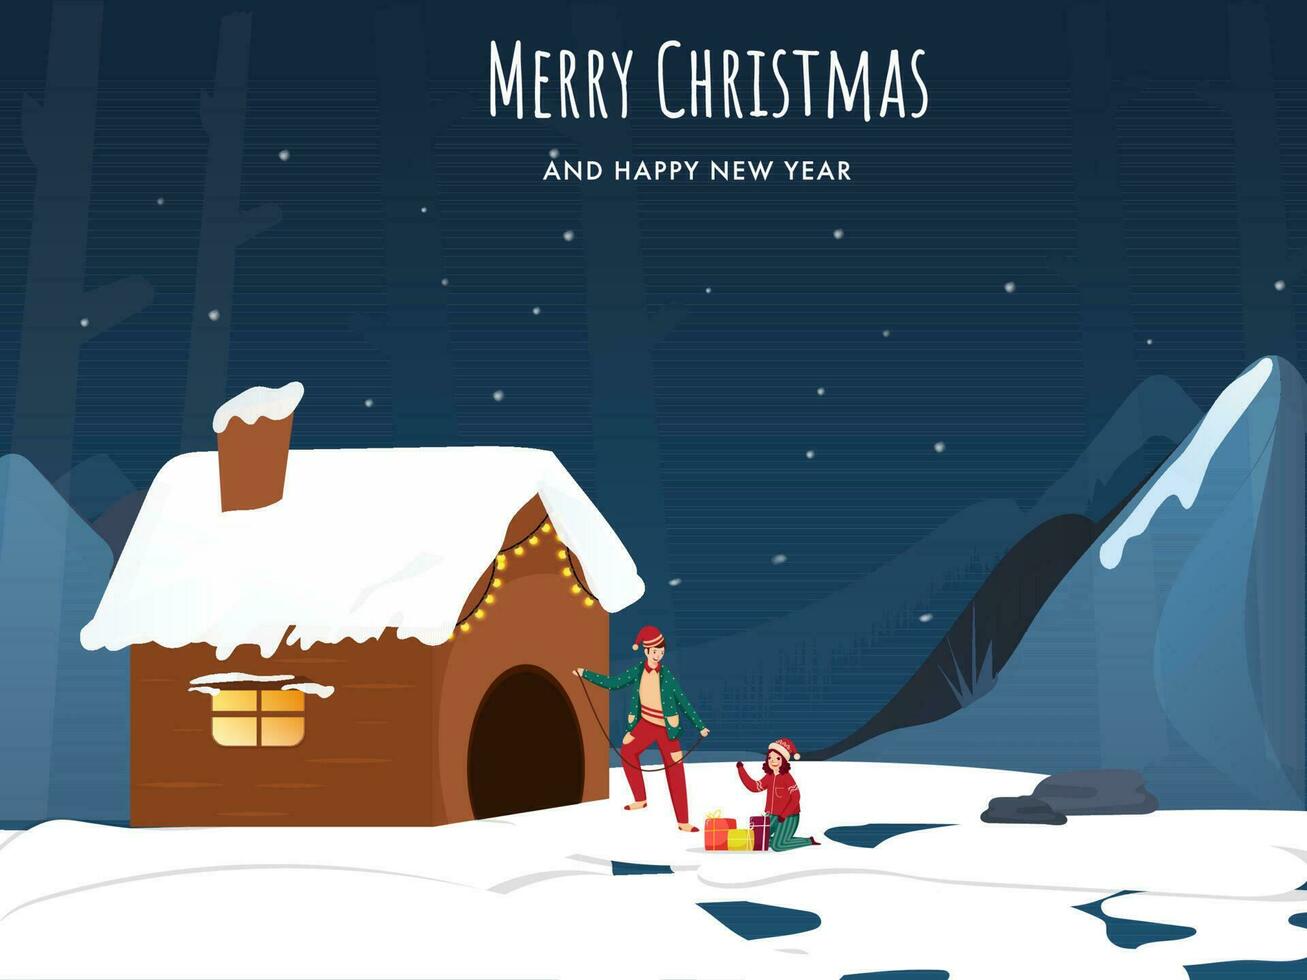 Merry Christmas And New Year Concept With Young Boy, Girl Decorated Chimney House On Snowfall Blue Mountain Background. vector